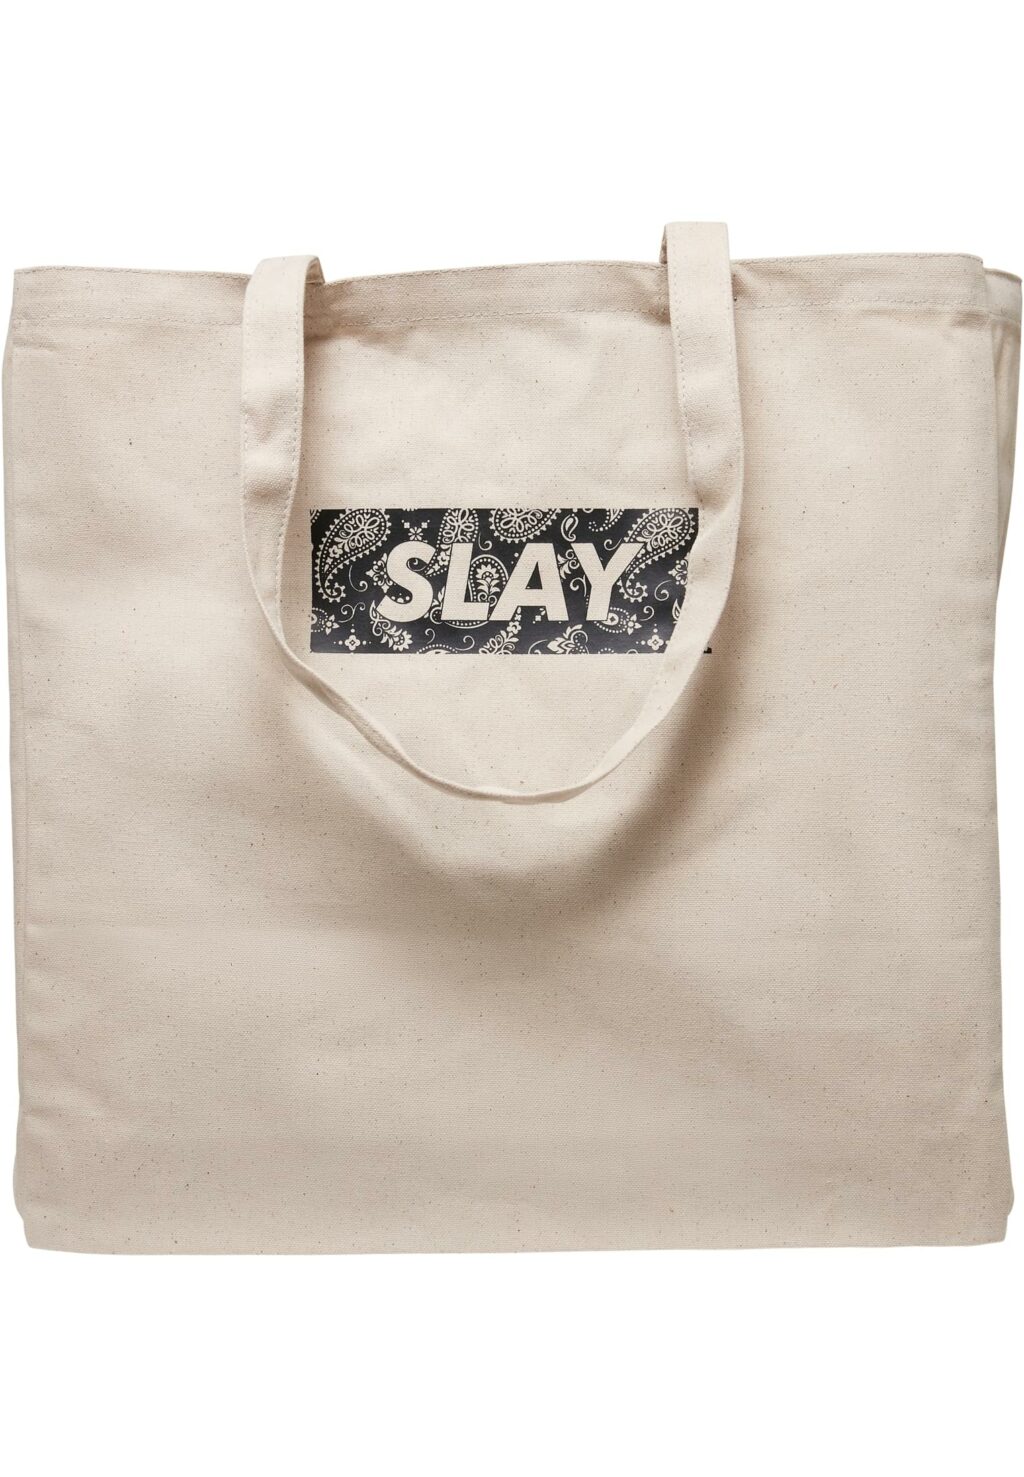 SLAY Oversize Canvas Tote Bag offwhite one MT2282